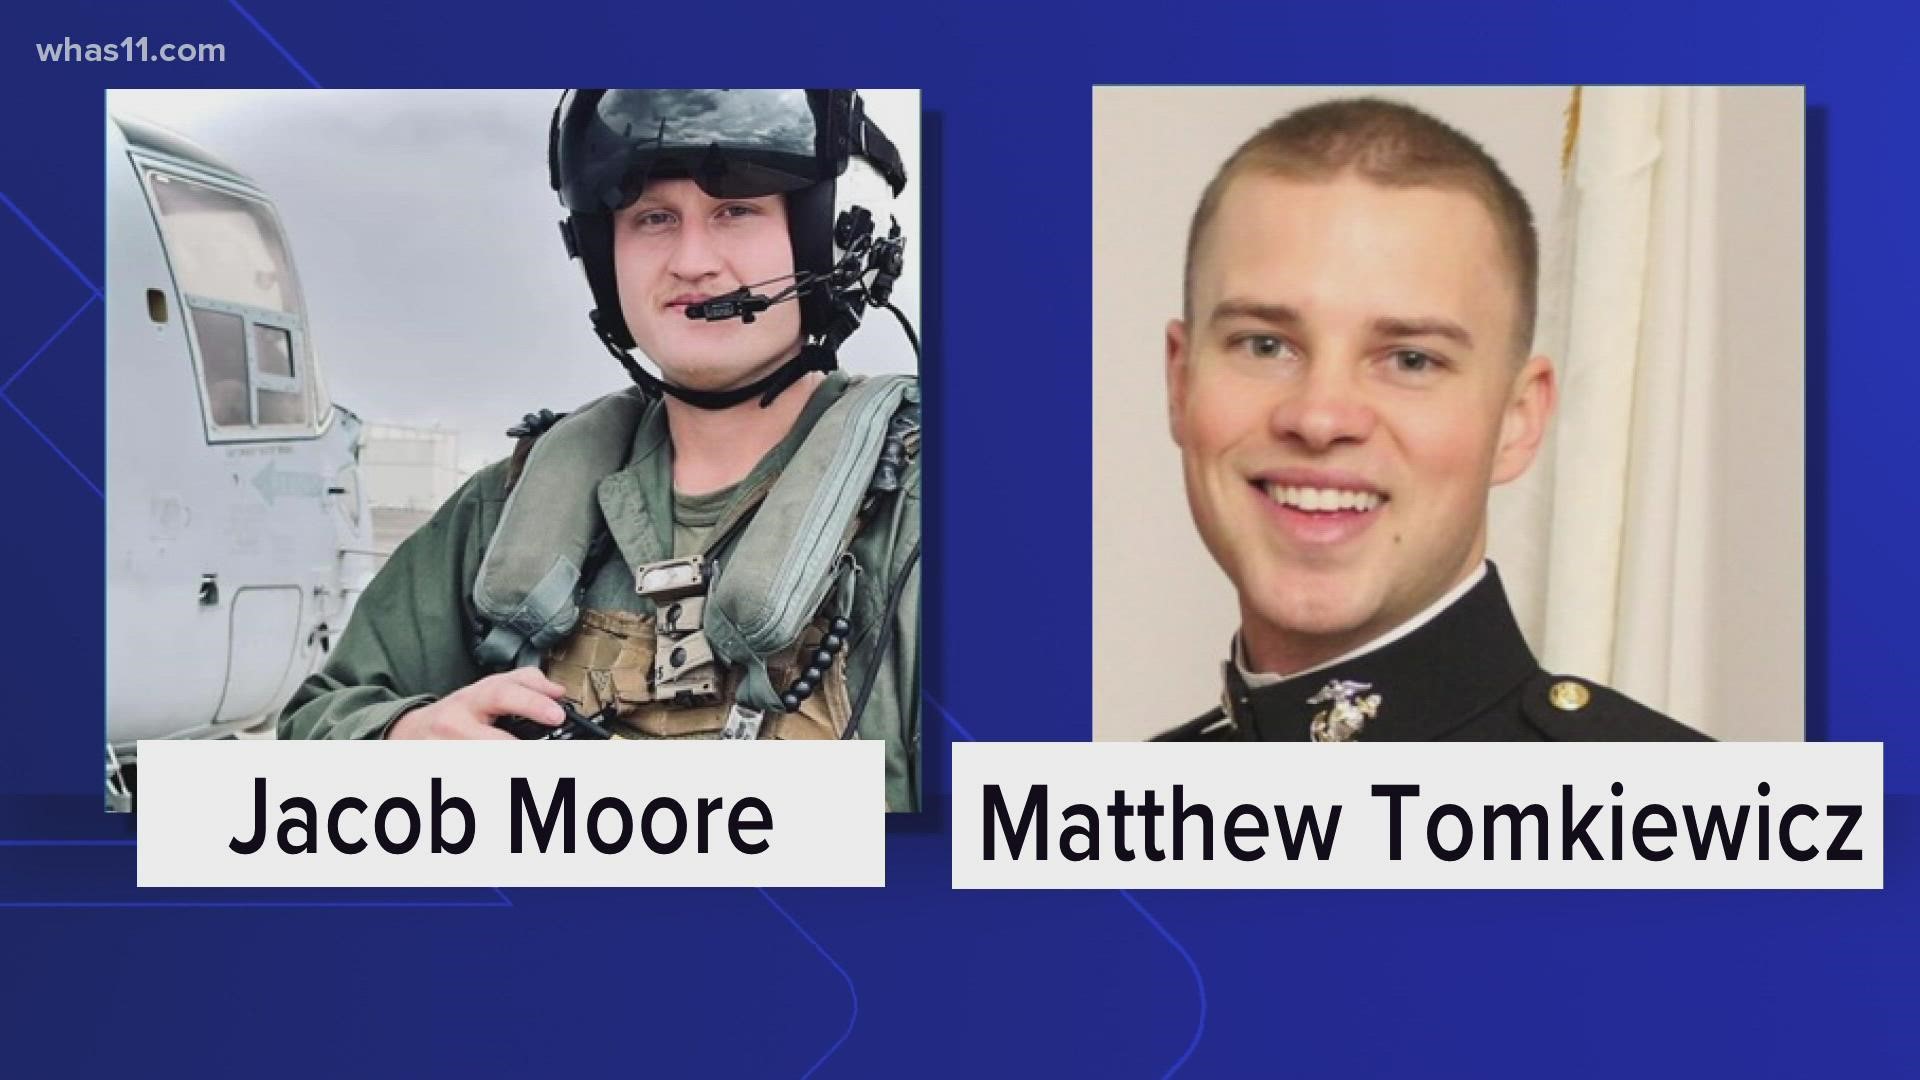 Marine Corporal Jacob Moore, 24, from Catlettsburg, Ky. and Captain Matthew Tomkiewicz, 27, from Fort Wayne, Ind. are two of the 4 Marines who died.